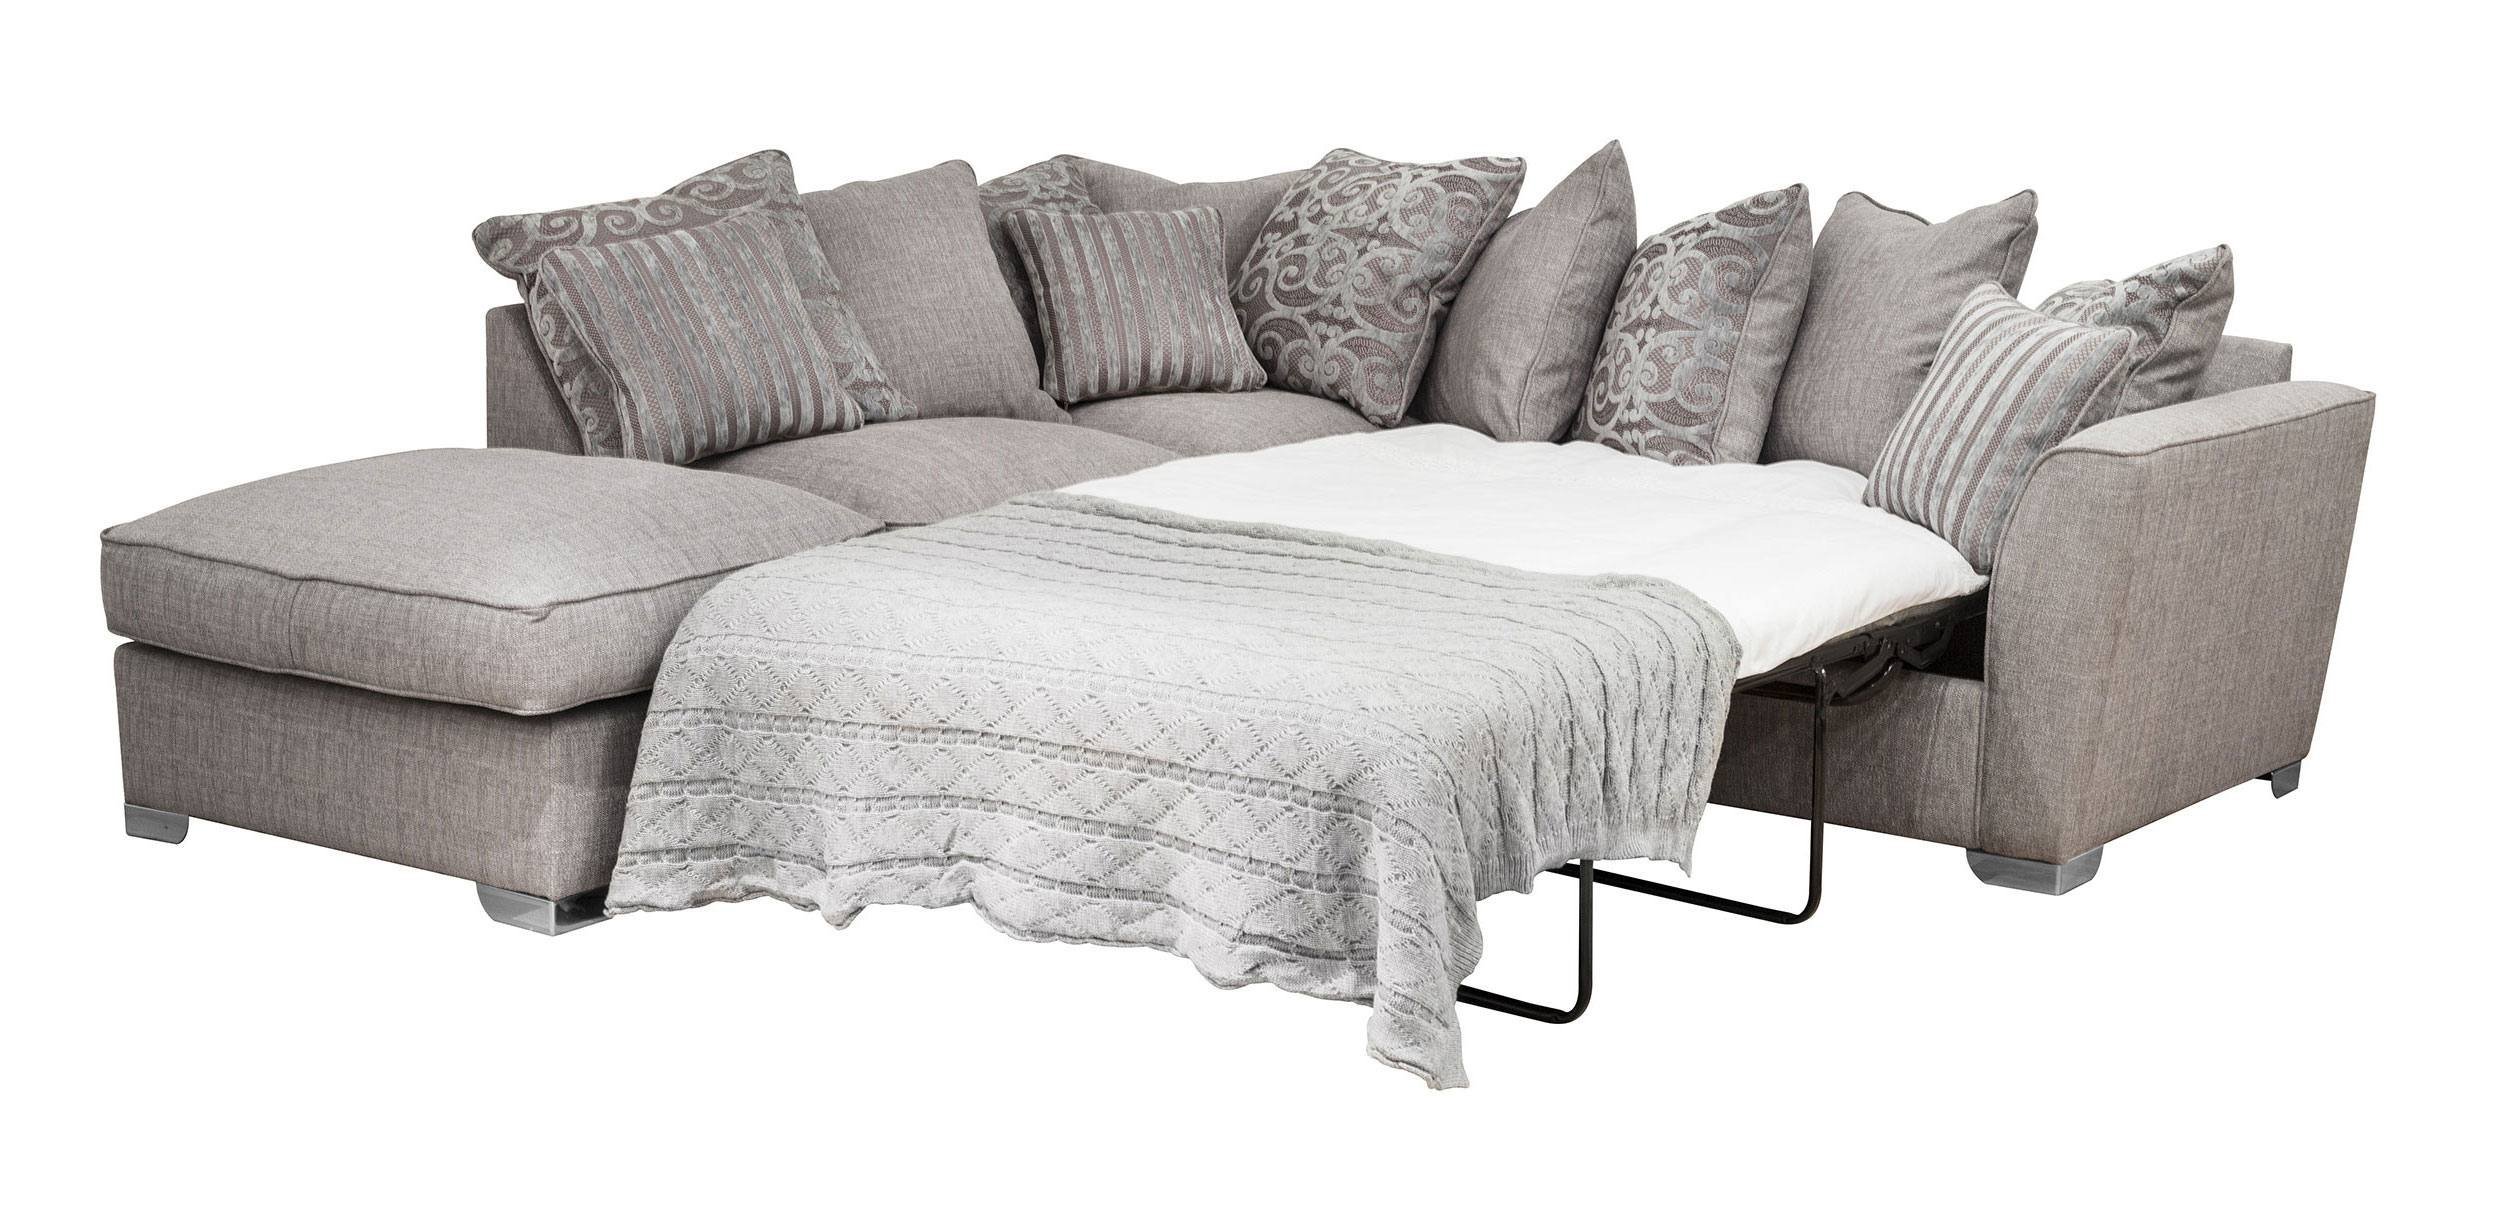 sofa bed uk buy now pay later